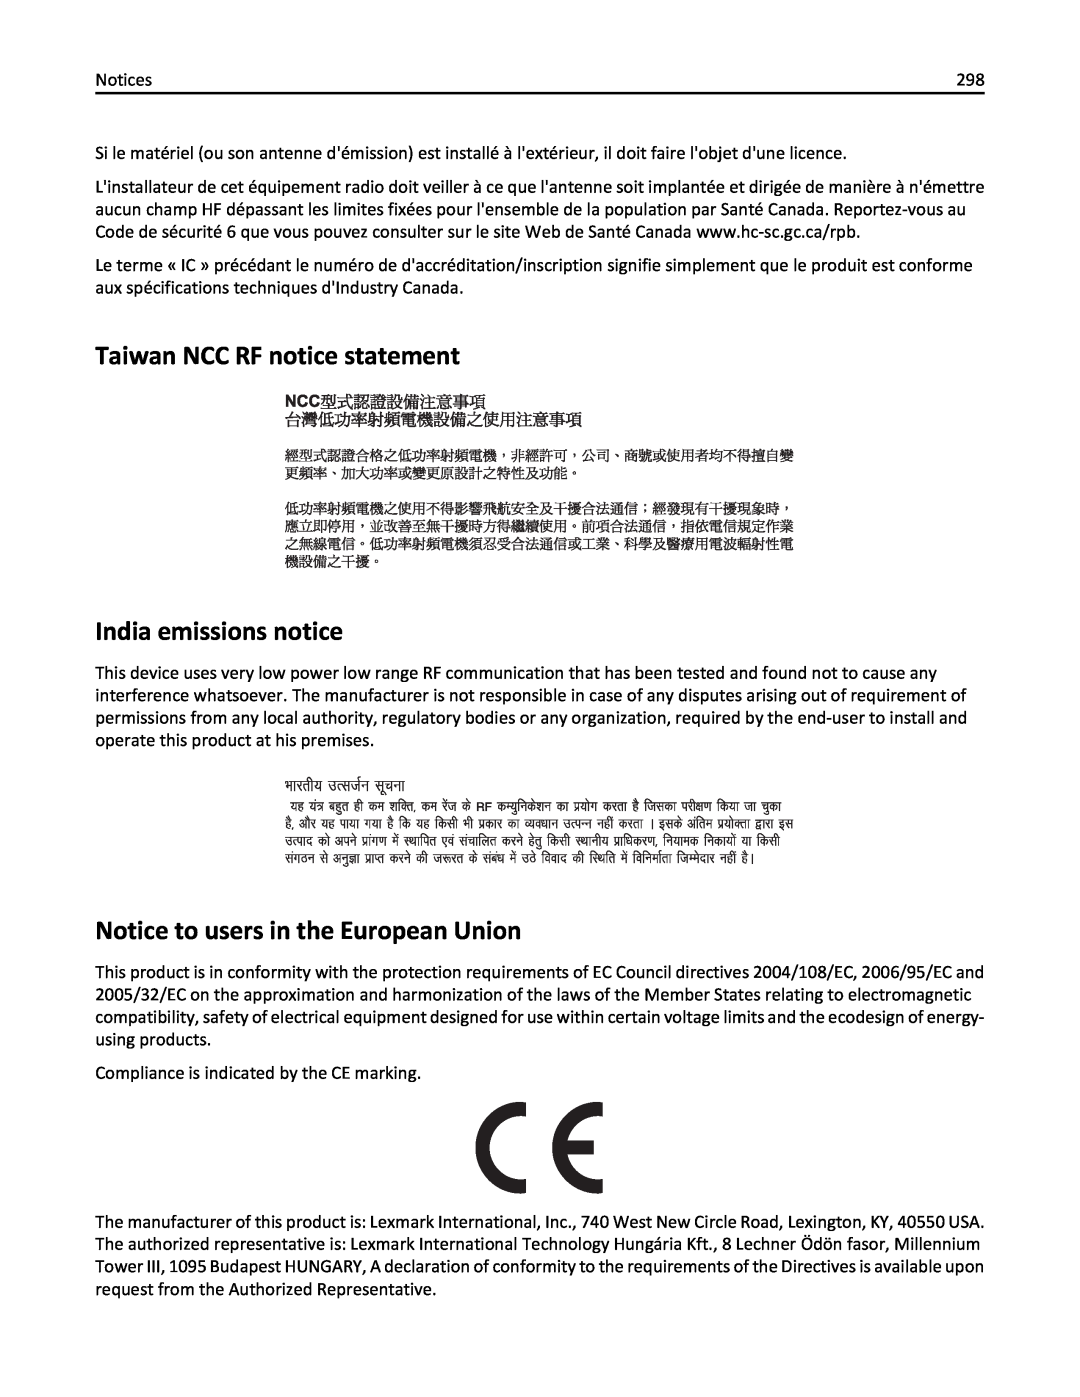 Lexmark 19Z0101, 432, 632, 832 Taiwan NCC RF notice statement India emissions notice, Notice to users in the European Union 